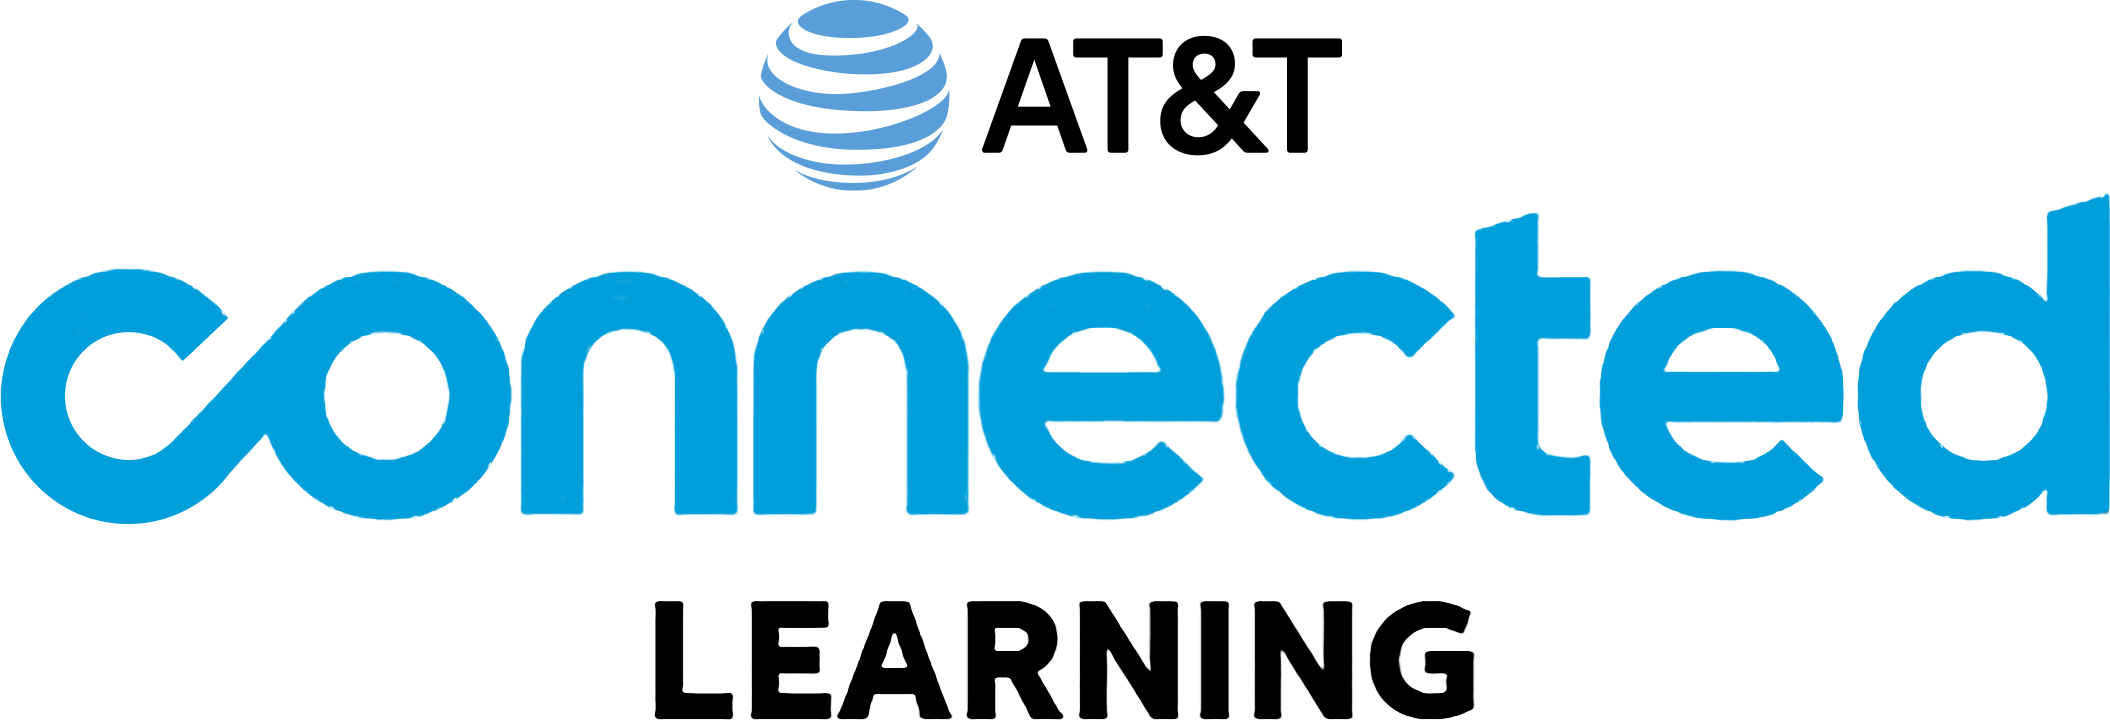 AT&T Connected Learning Logo. 
Click to redirect to Connected Learning form AT&T.